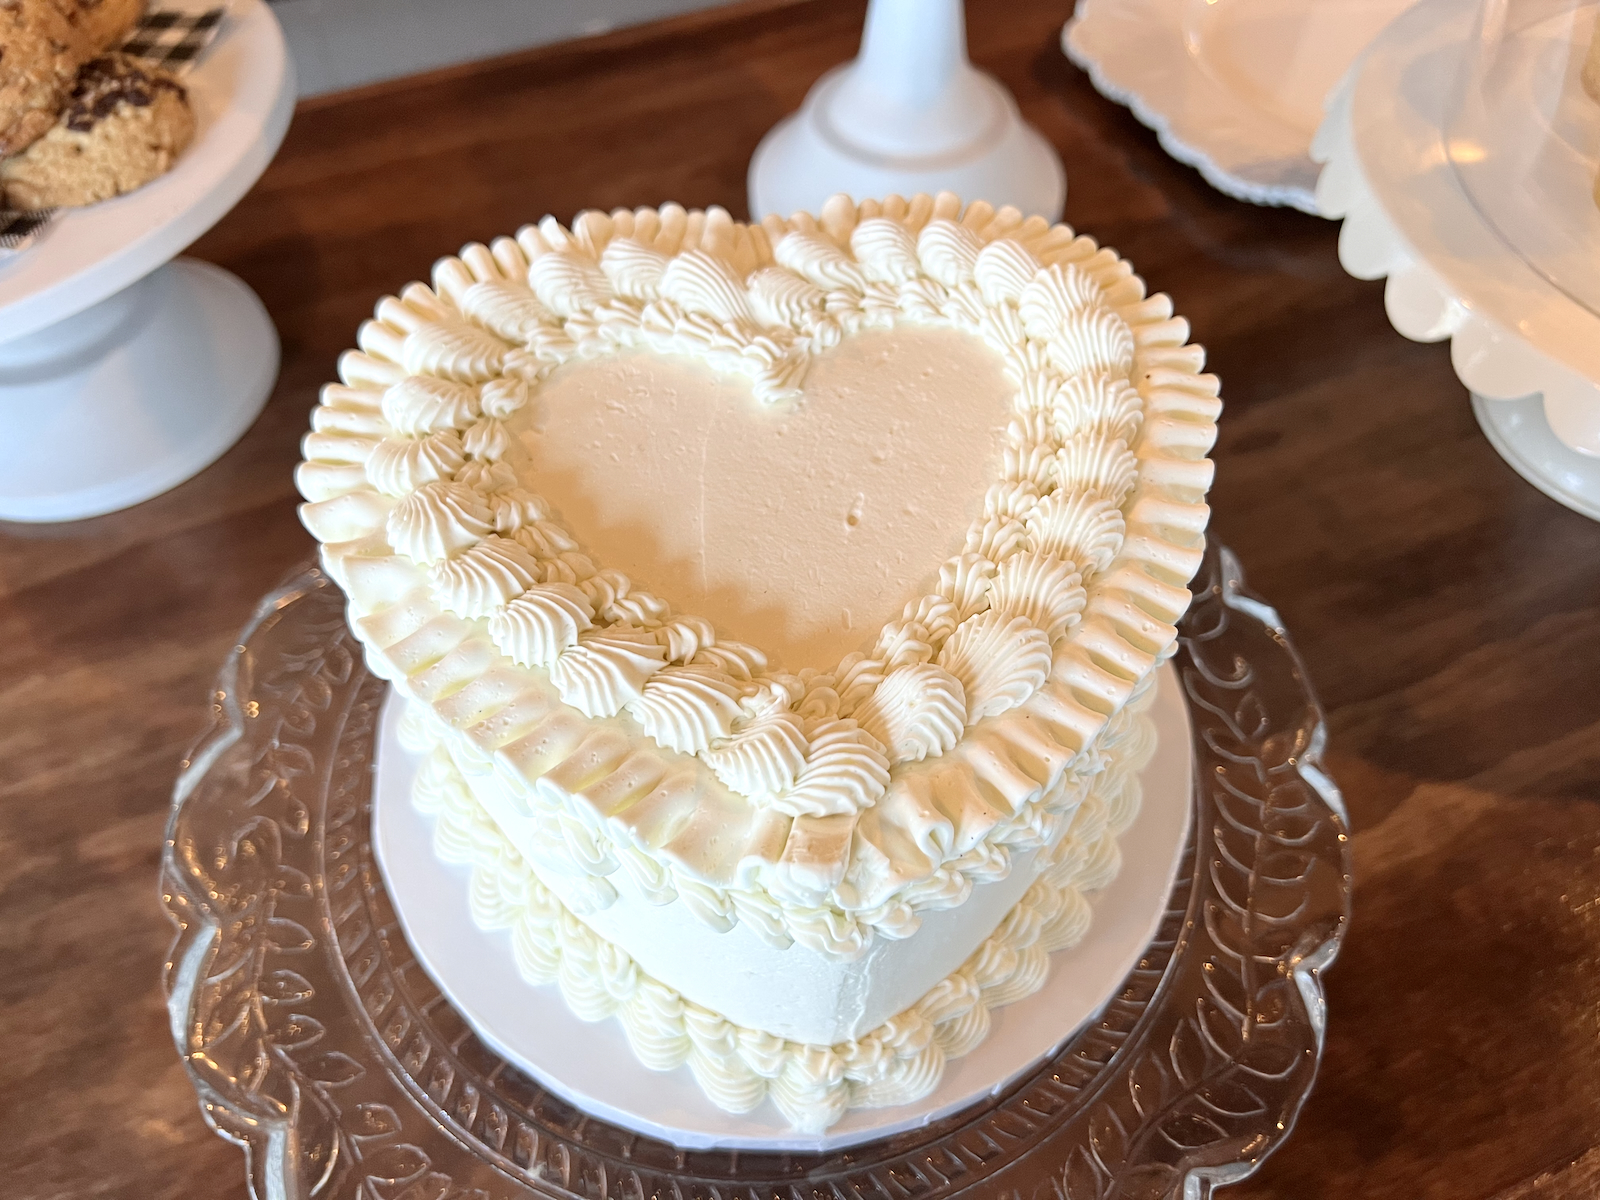 Heart shaped cake from Lucy Bakes